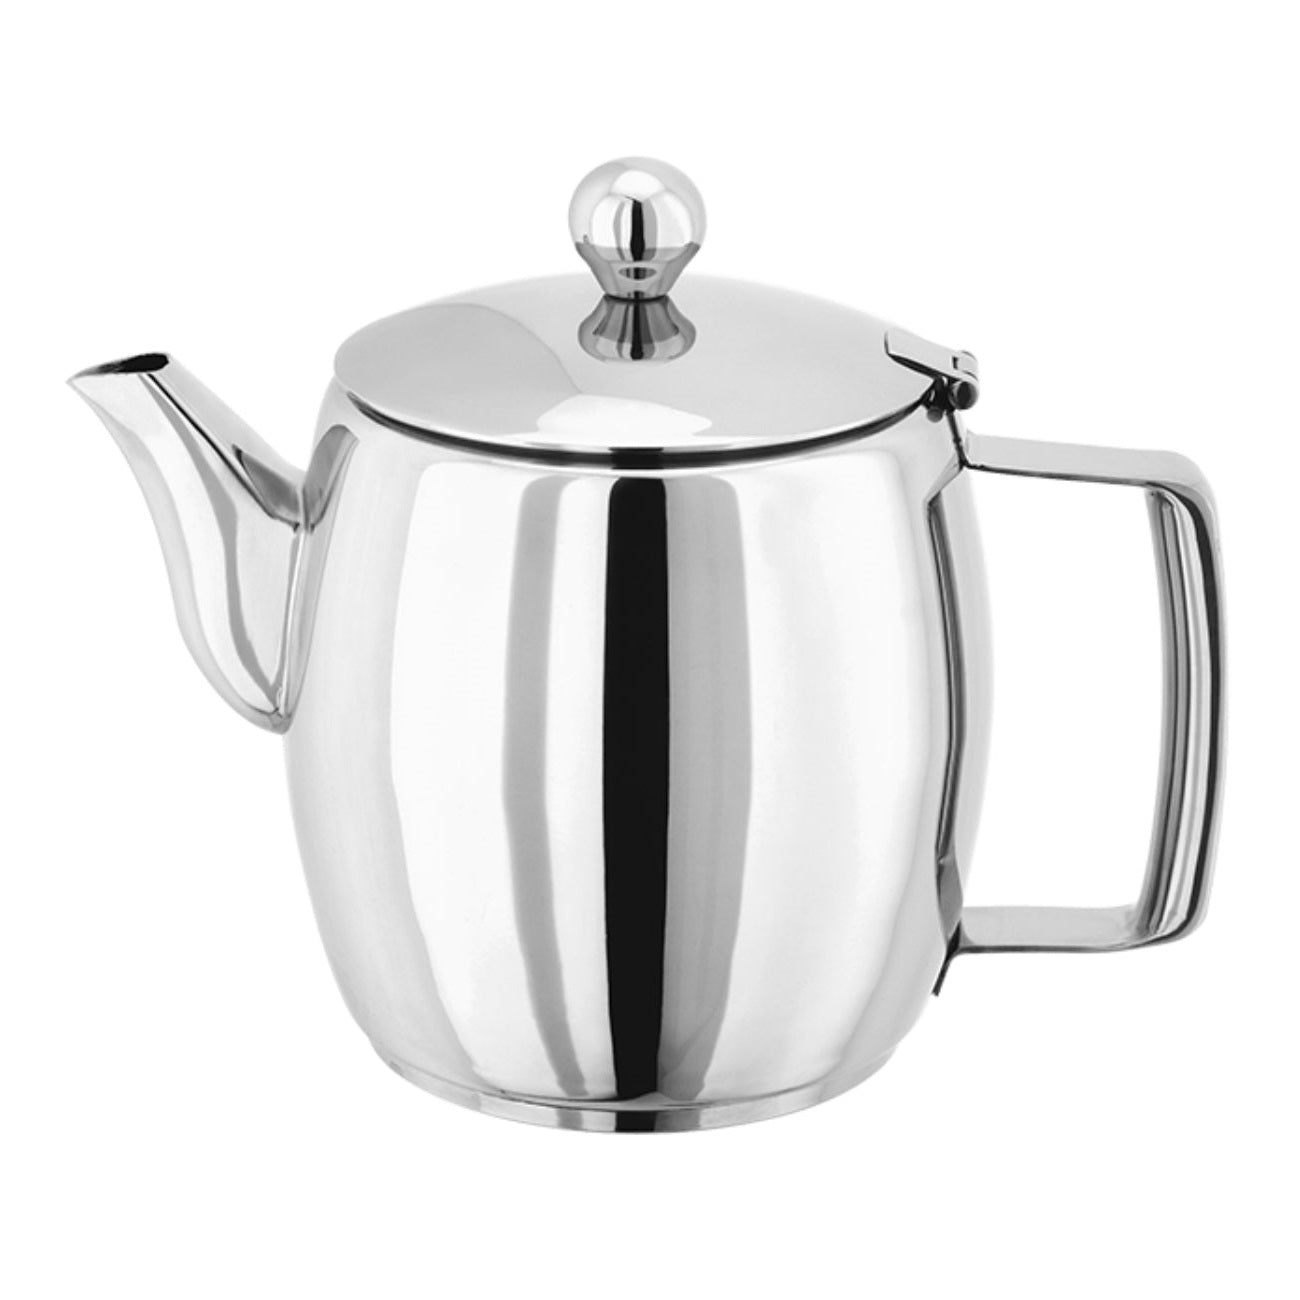 Judge 2 Litre Hob Top Stainless Steel Teapot